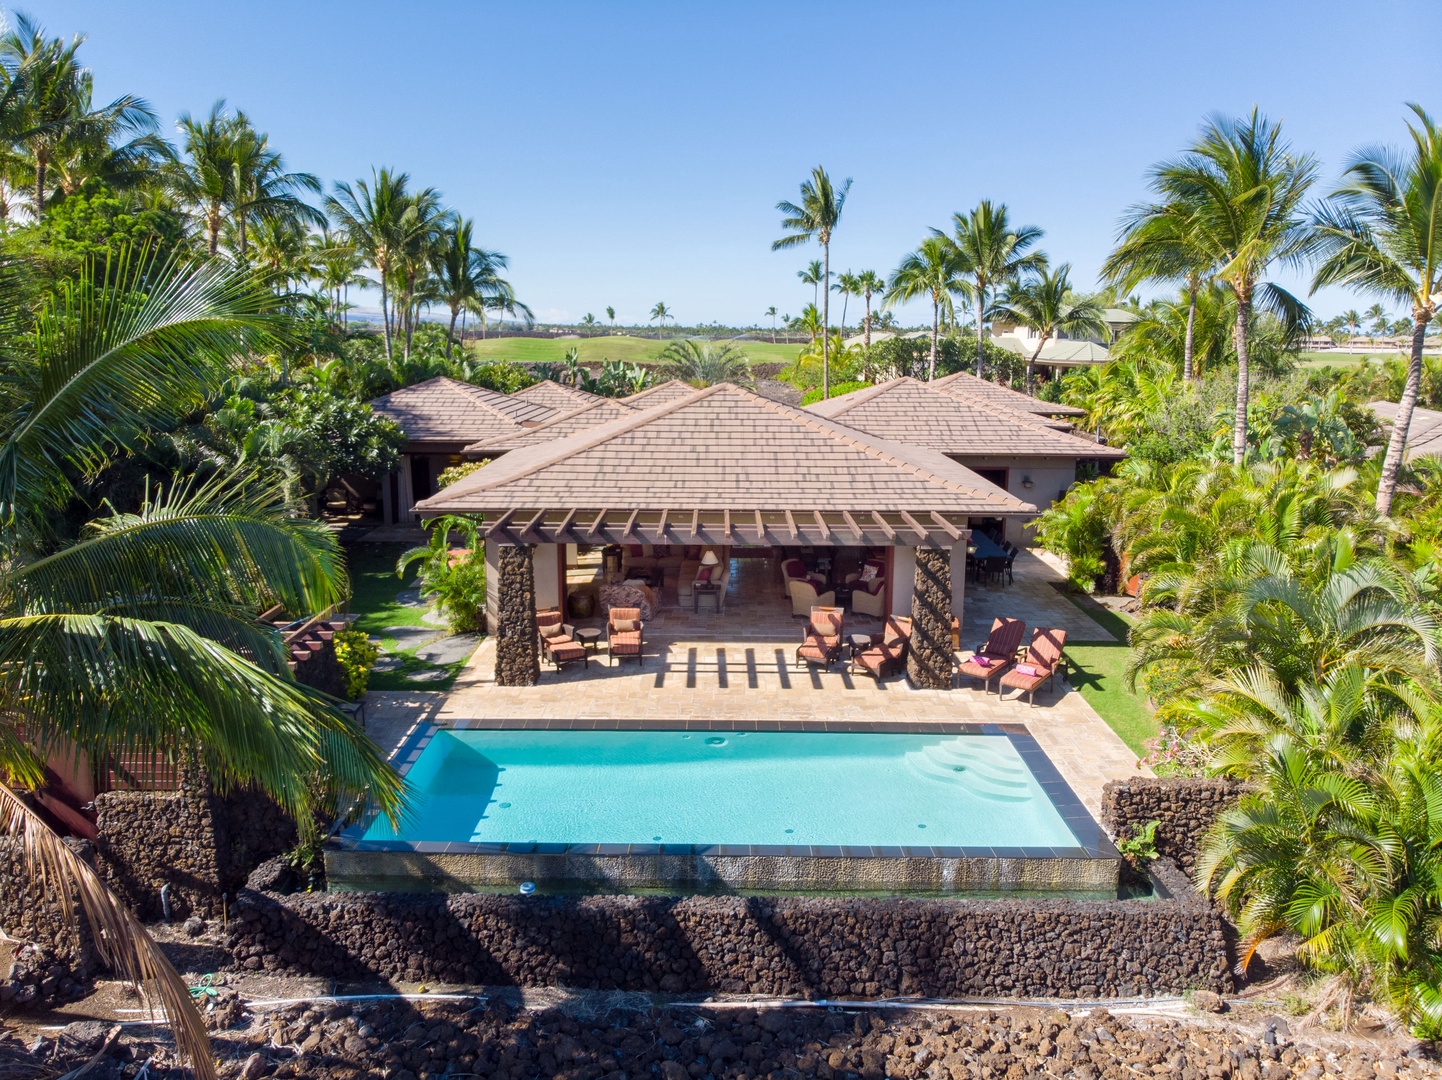 Kamuela Vacation Rentals, House of the Turtle at Champion Ridge, Mauna Lani (CR 18) - A Tropical Oasis Surrounded by Lush Foliage